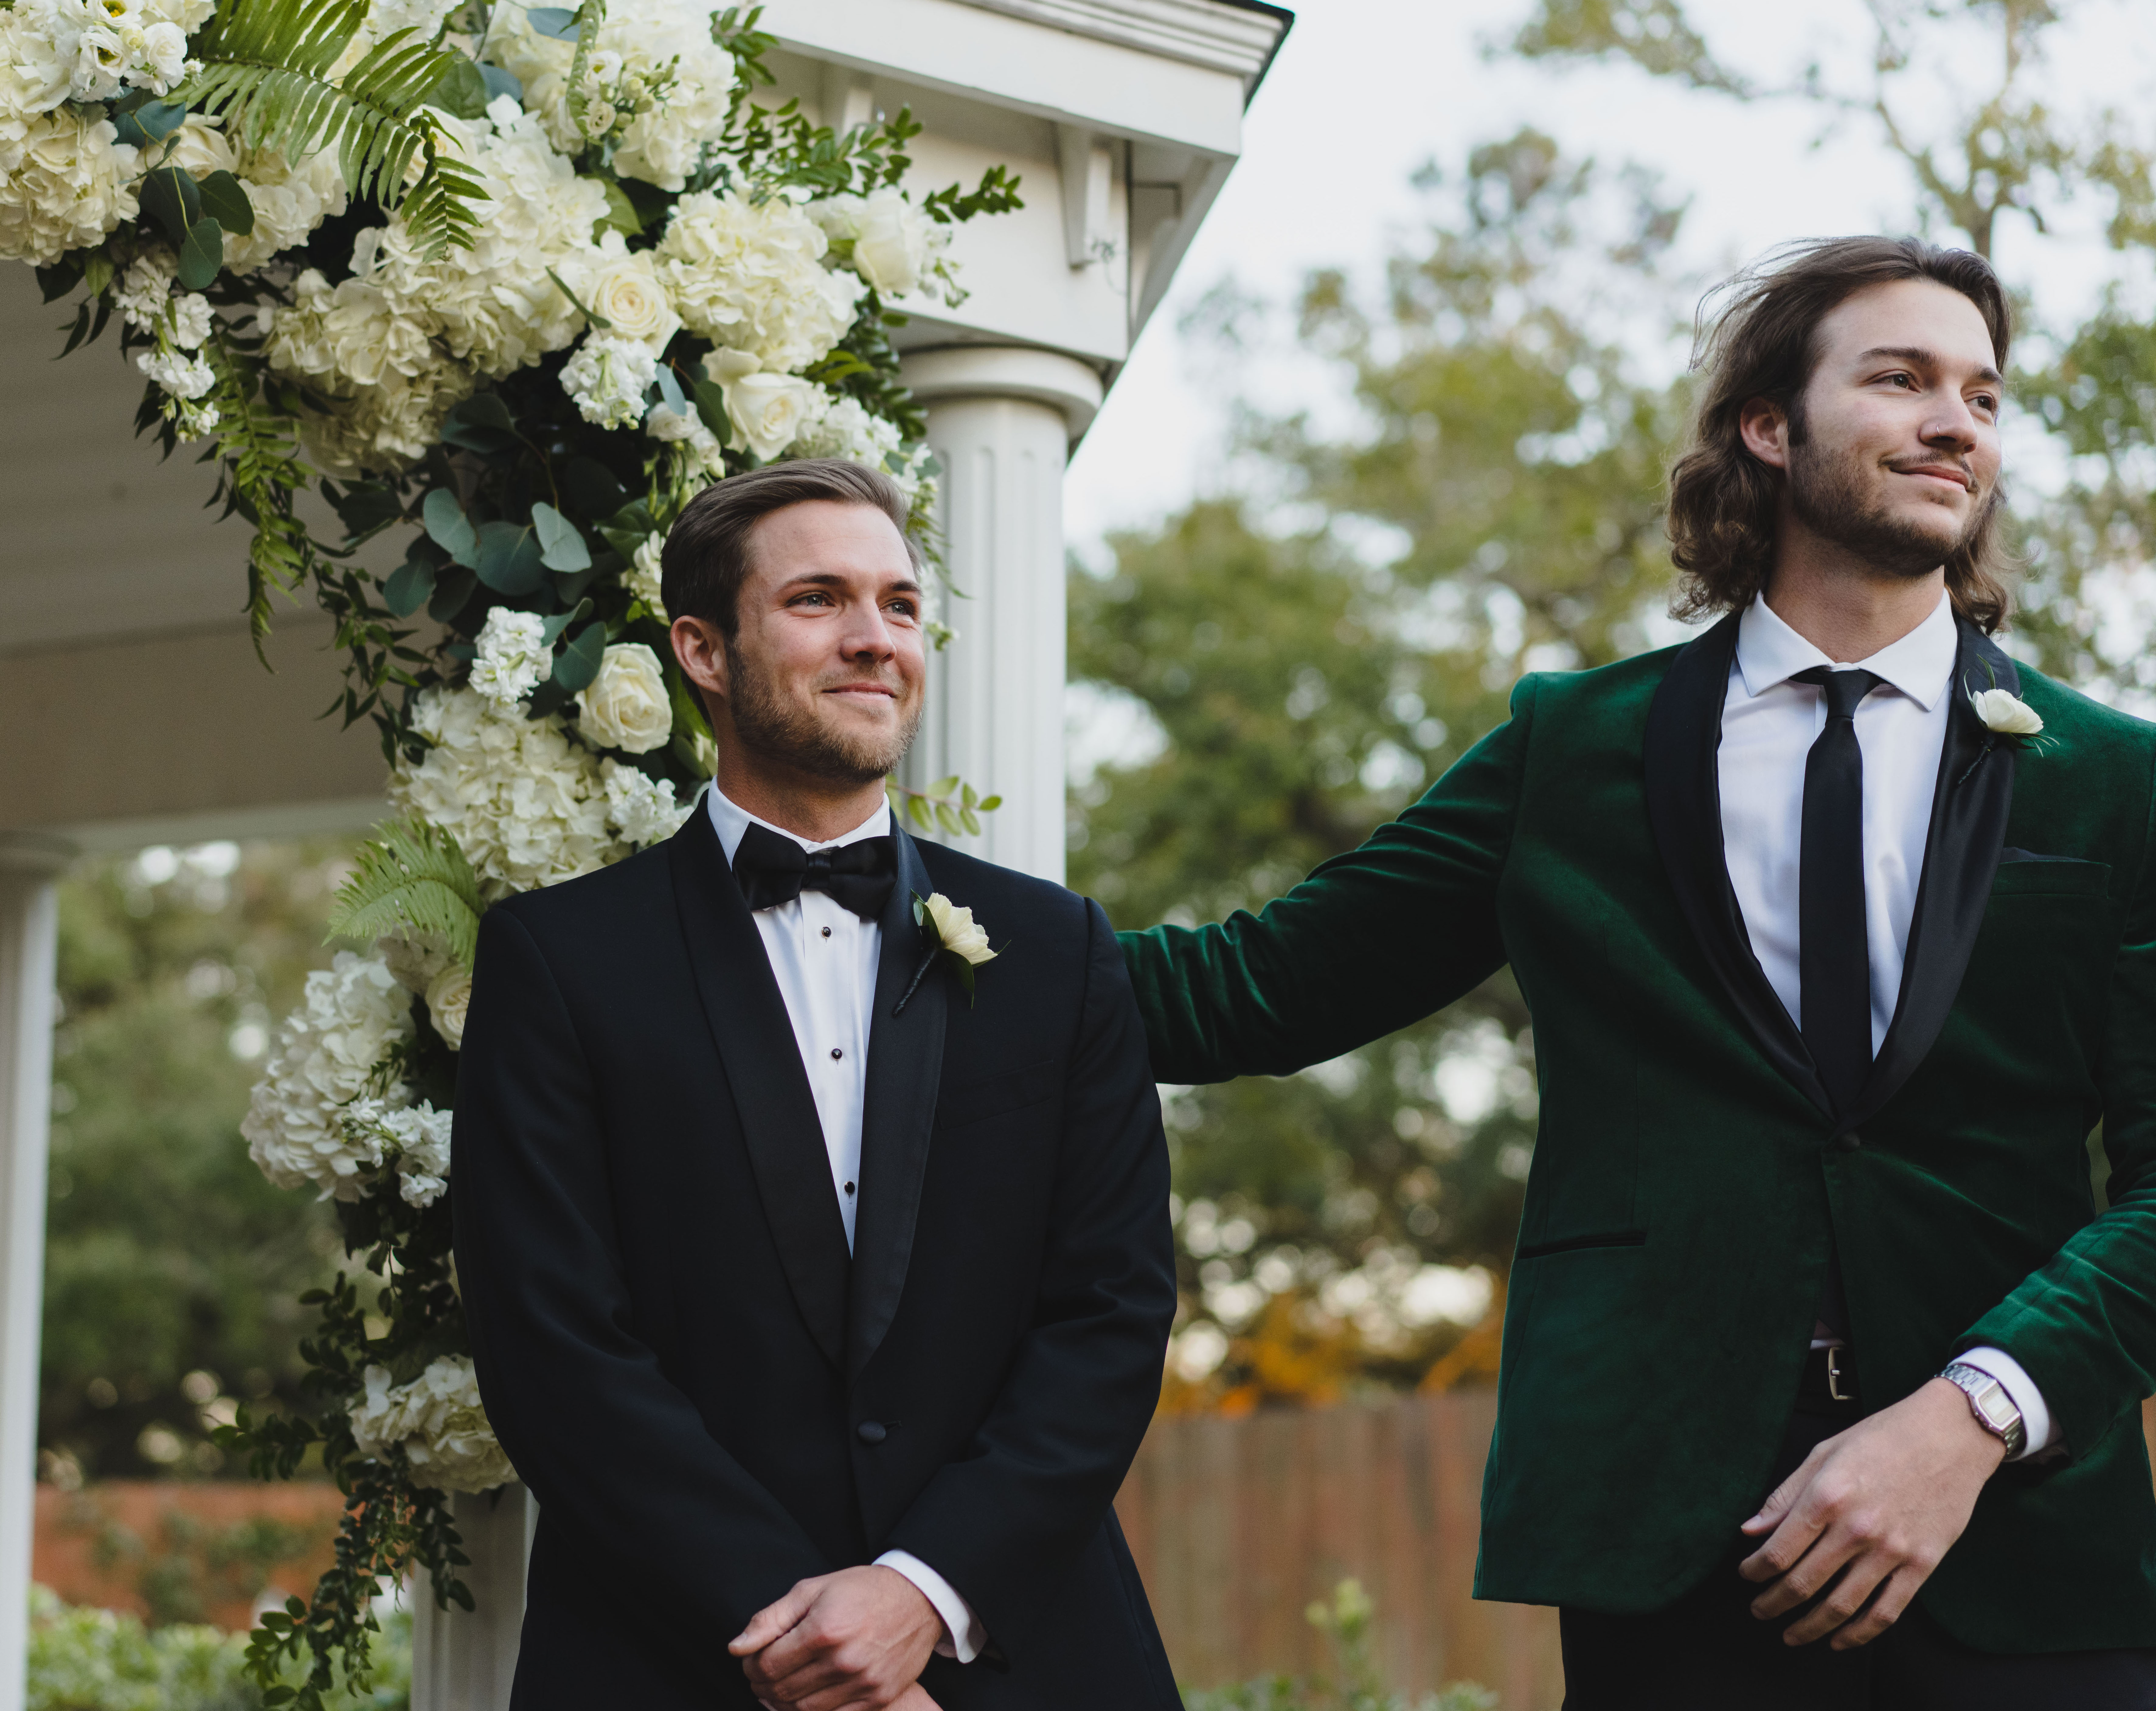 Jordan Kimball smiles as his bride walks down the aisle of their outdoor ceremony in Houston, TX.